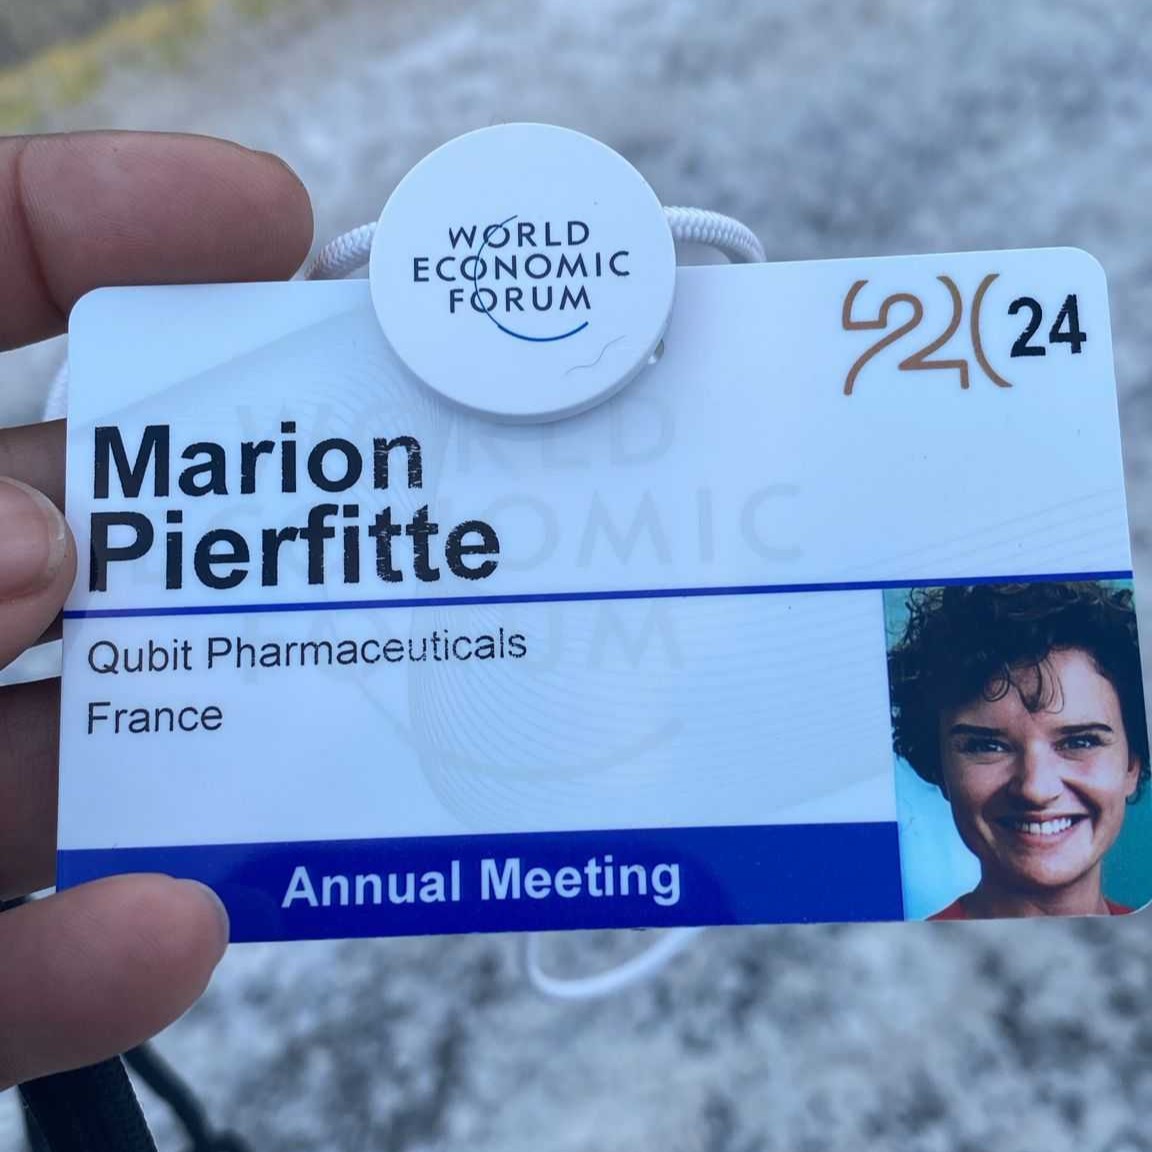 We're in #Davos alongside President @EmmanuelMacron! 'Excited to share with an international audience how we leverage cutting-edge science and quantum technologies to create value for patients' - Marion Pierfitte, COO. @LaFrenchTech @businessfrance loom.ly/kCMq3gw